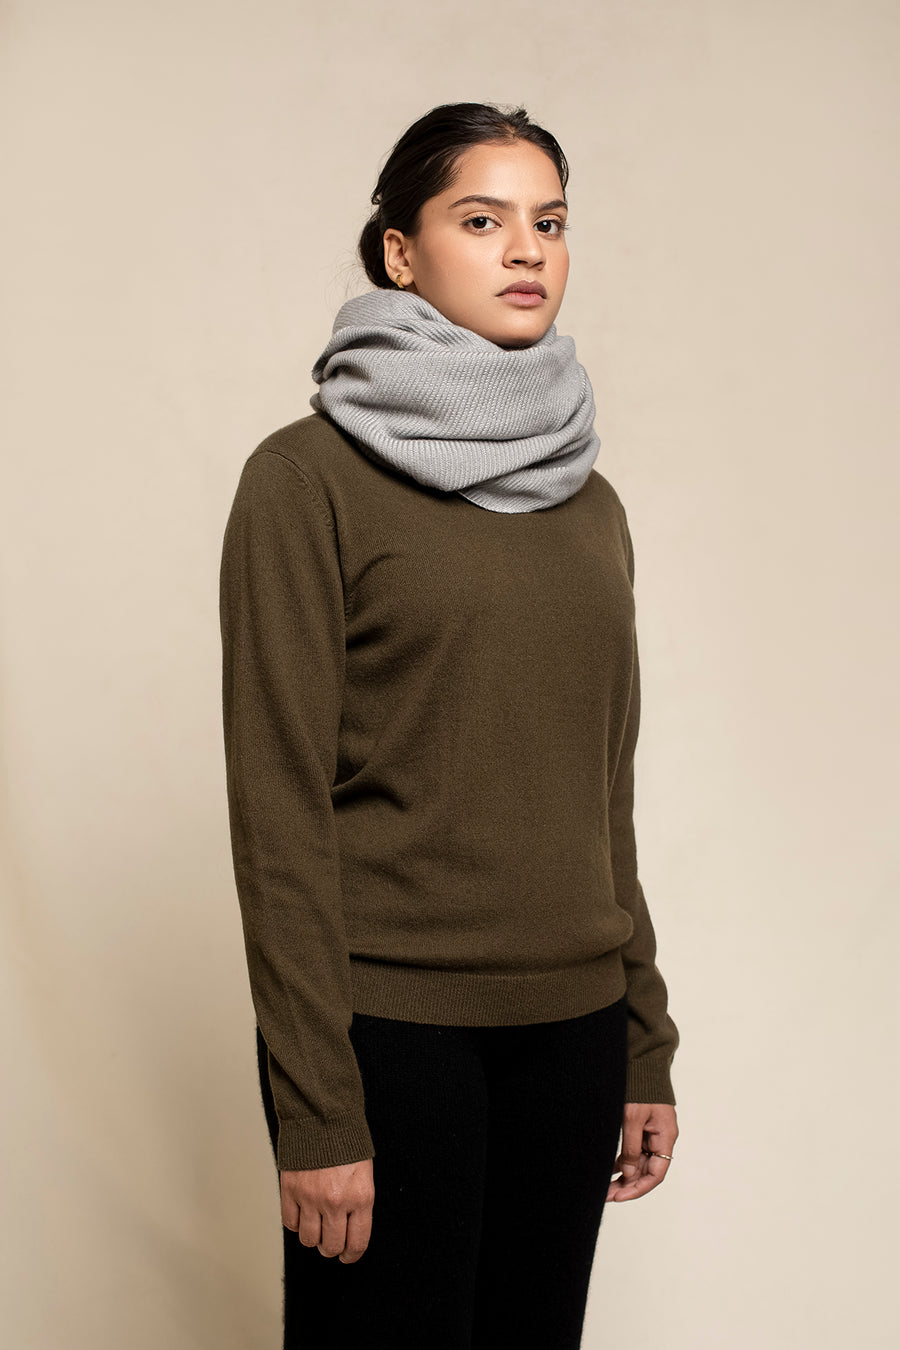 Tailored Diagonal Woven Unisex Scarf